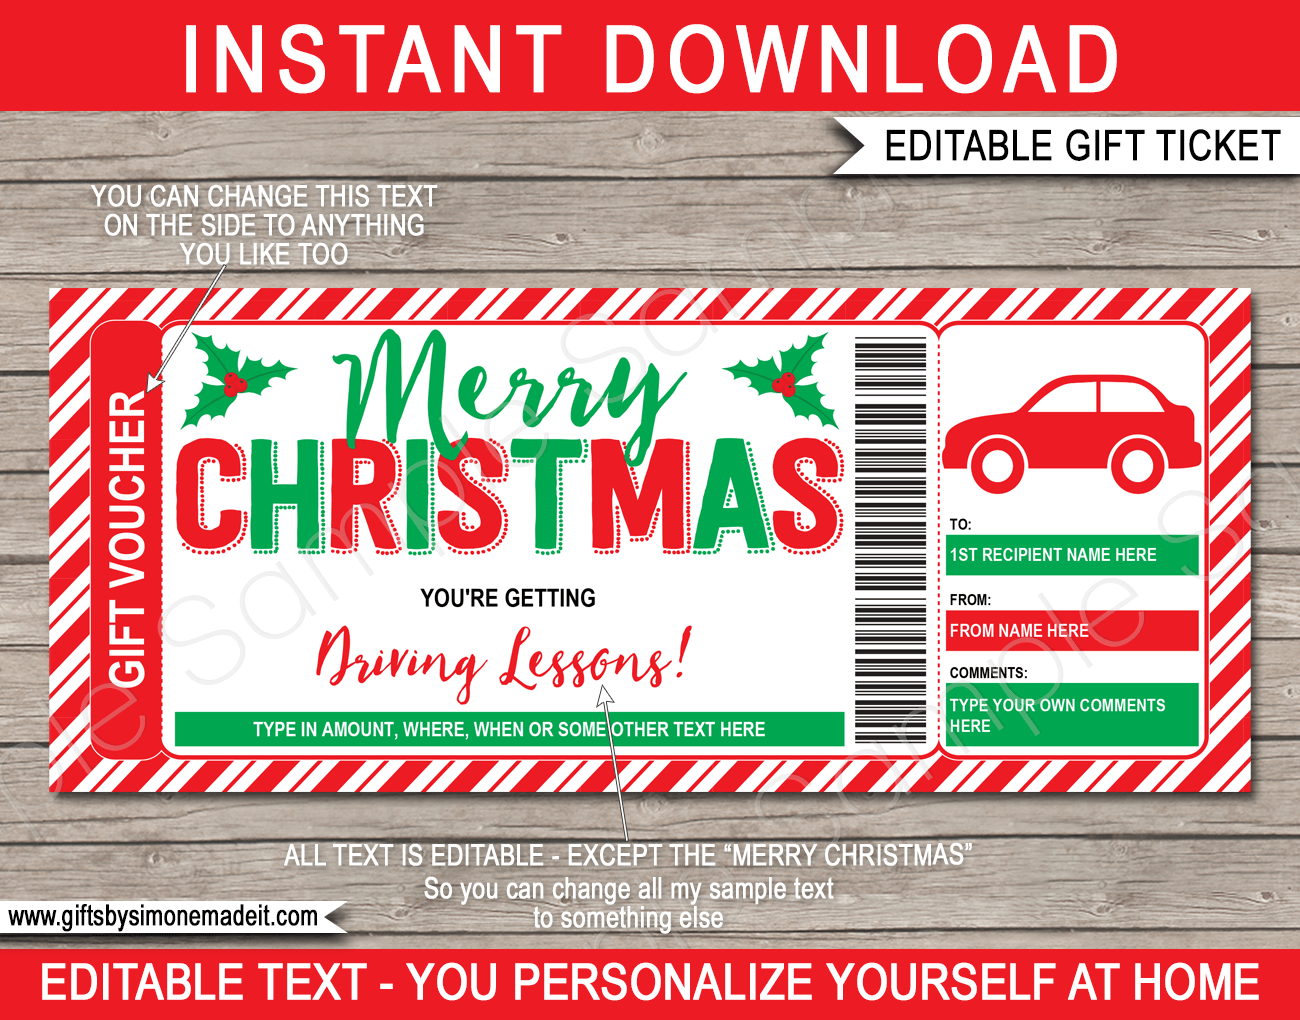 https://www.giftsbysimonemadeit.com/wp-content/uploads/2021/06/Christmas-Driving-Lessons-Gift-Vouchers-Template.png